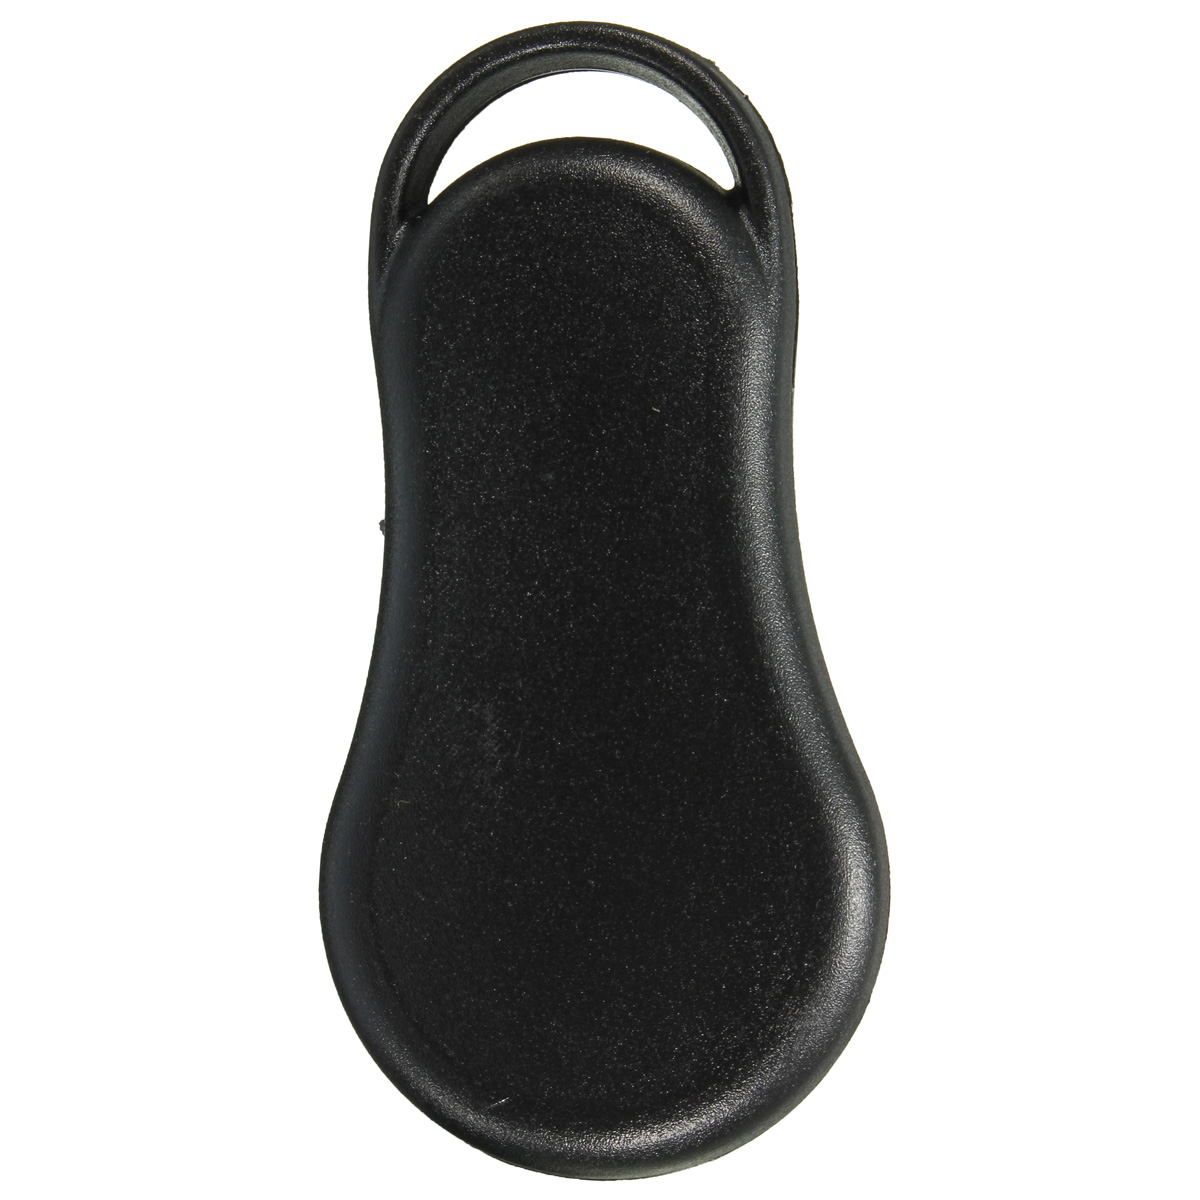 Replacement keyless entry remote jeep #5